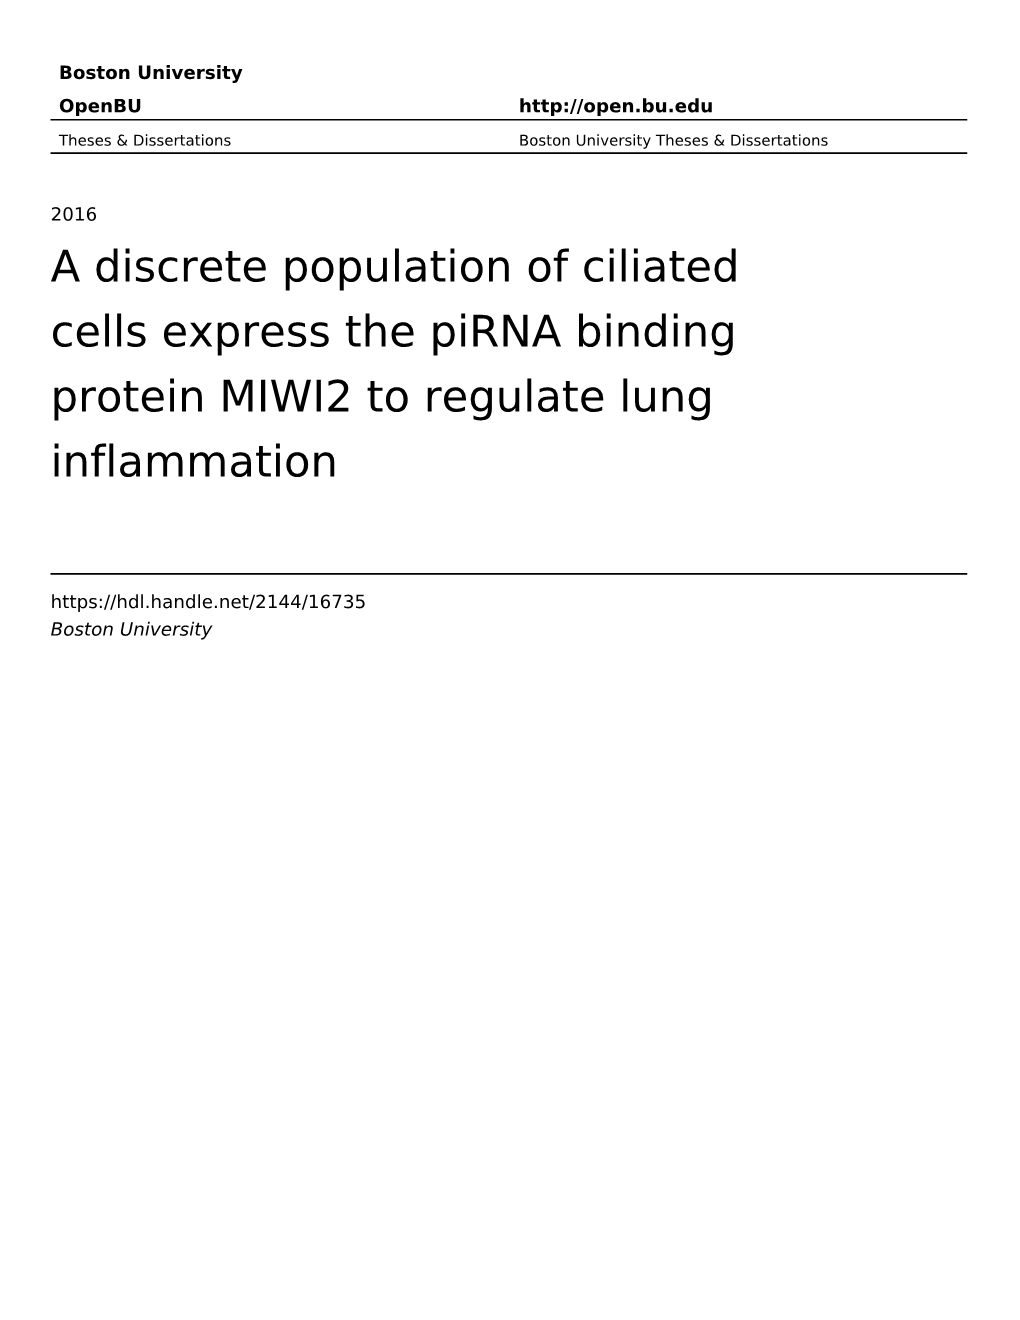 A Discrete Population of Ciliated Cells Express the Pirna Binding Protein MIWI2 to Regulate Lung Inflammation